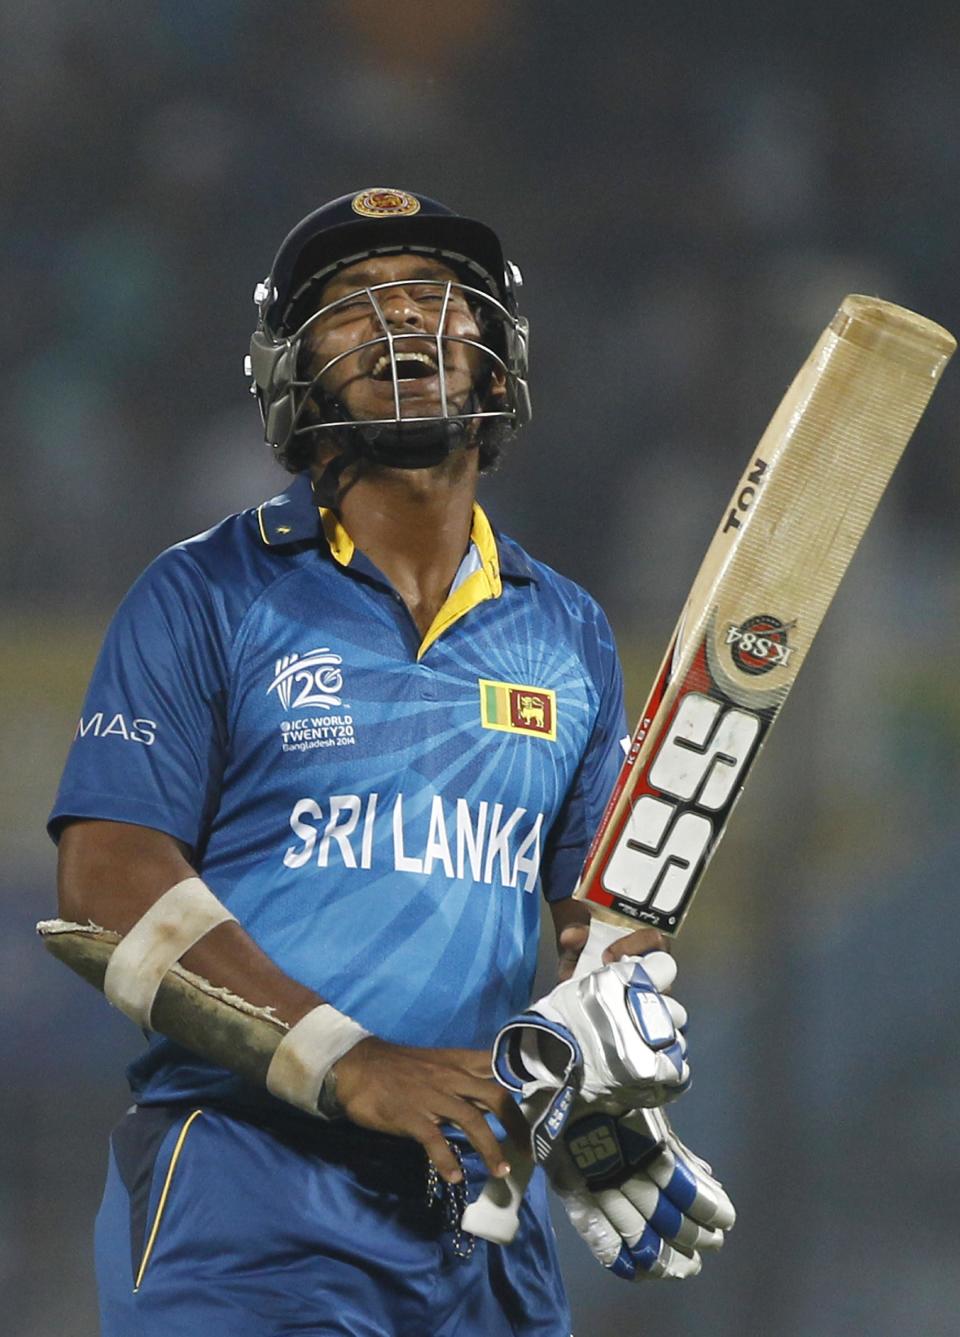 Sri Lanka's Kumar Sangakkara reacts as he walks back to the pavilion after his dismissal by New Zealand's Trent Boult during their ICC Twenty20 Cricket World Cup match in Chittagong, Bangladesh, Monday, March 31, 2014. (AP Photo/A.M. Ahad)